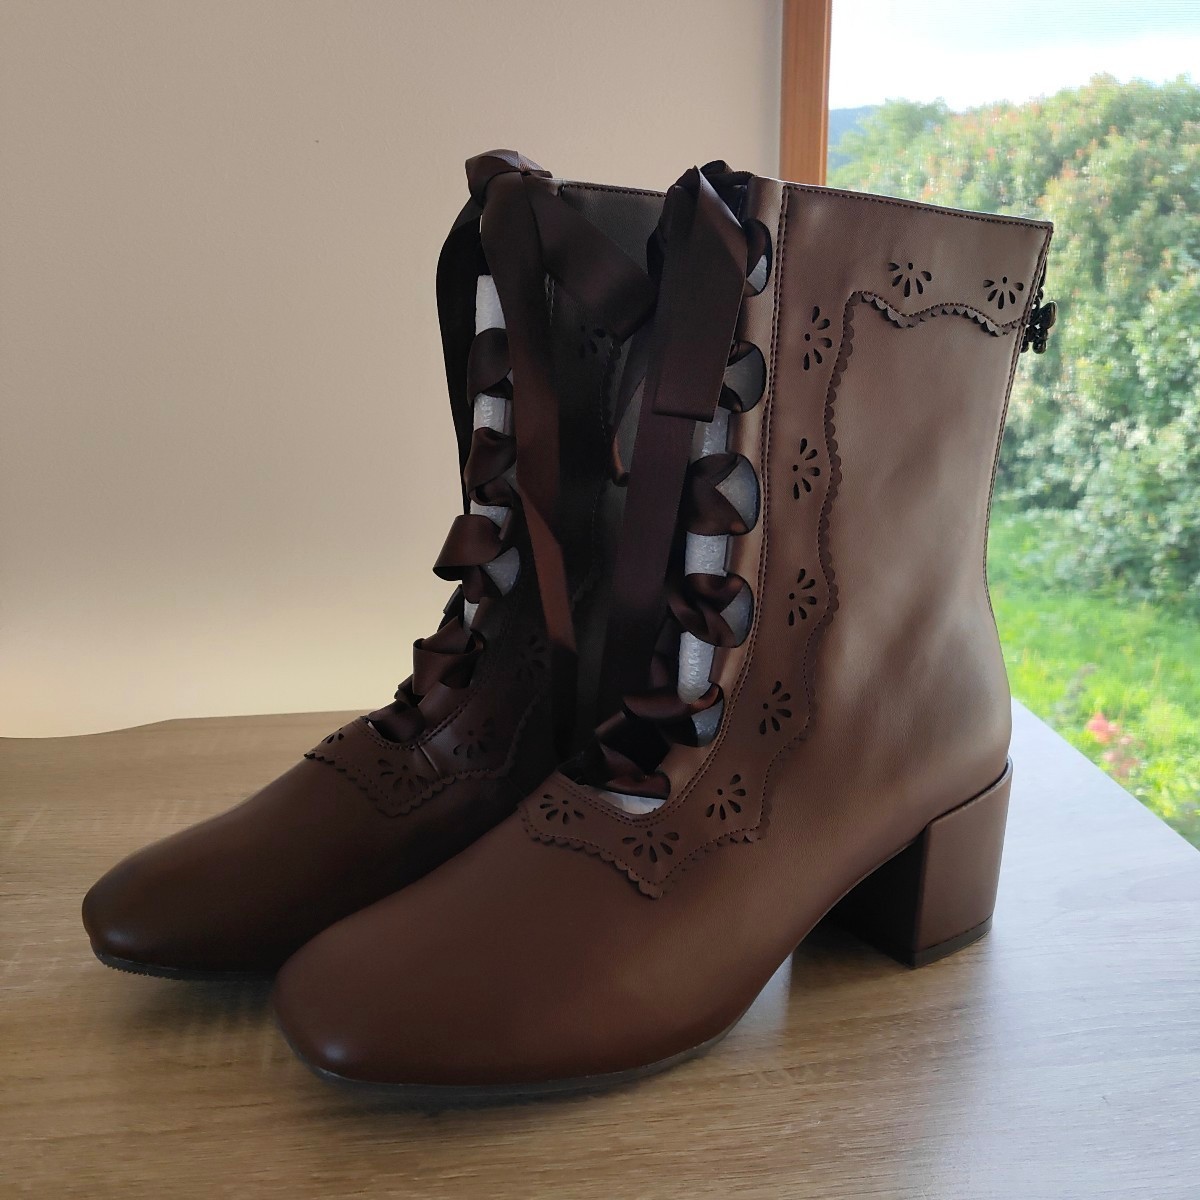 [ free shipping * anonymity delivery ] with translation special price! tag equipped axes femme axes femme race up gi Lee boots tea S size 22.5cm